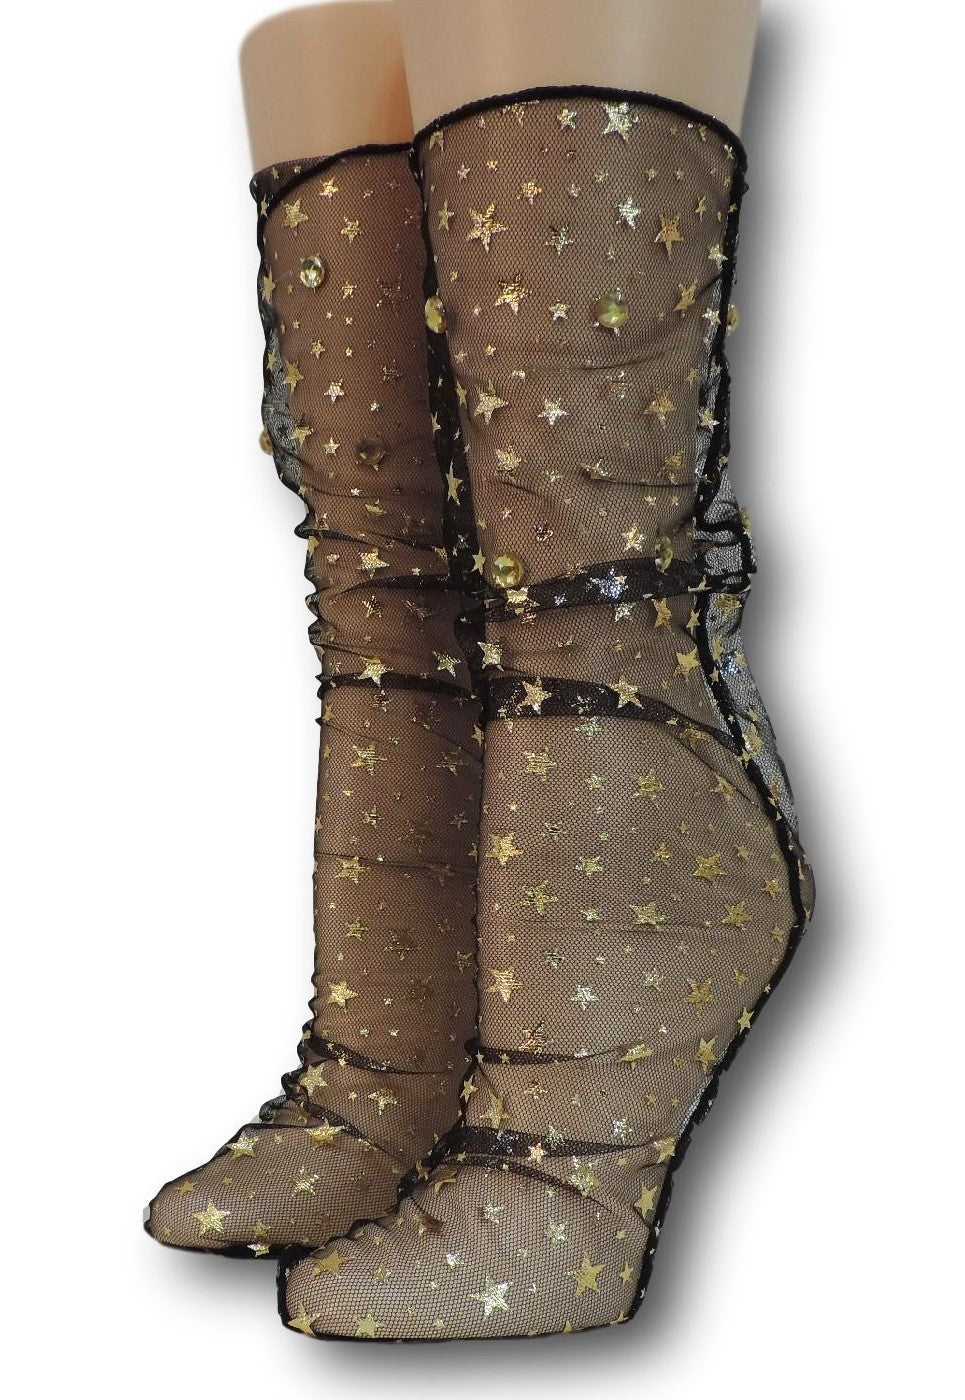 Golden Shiny Tulle Socks with beads